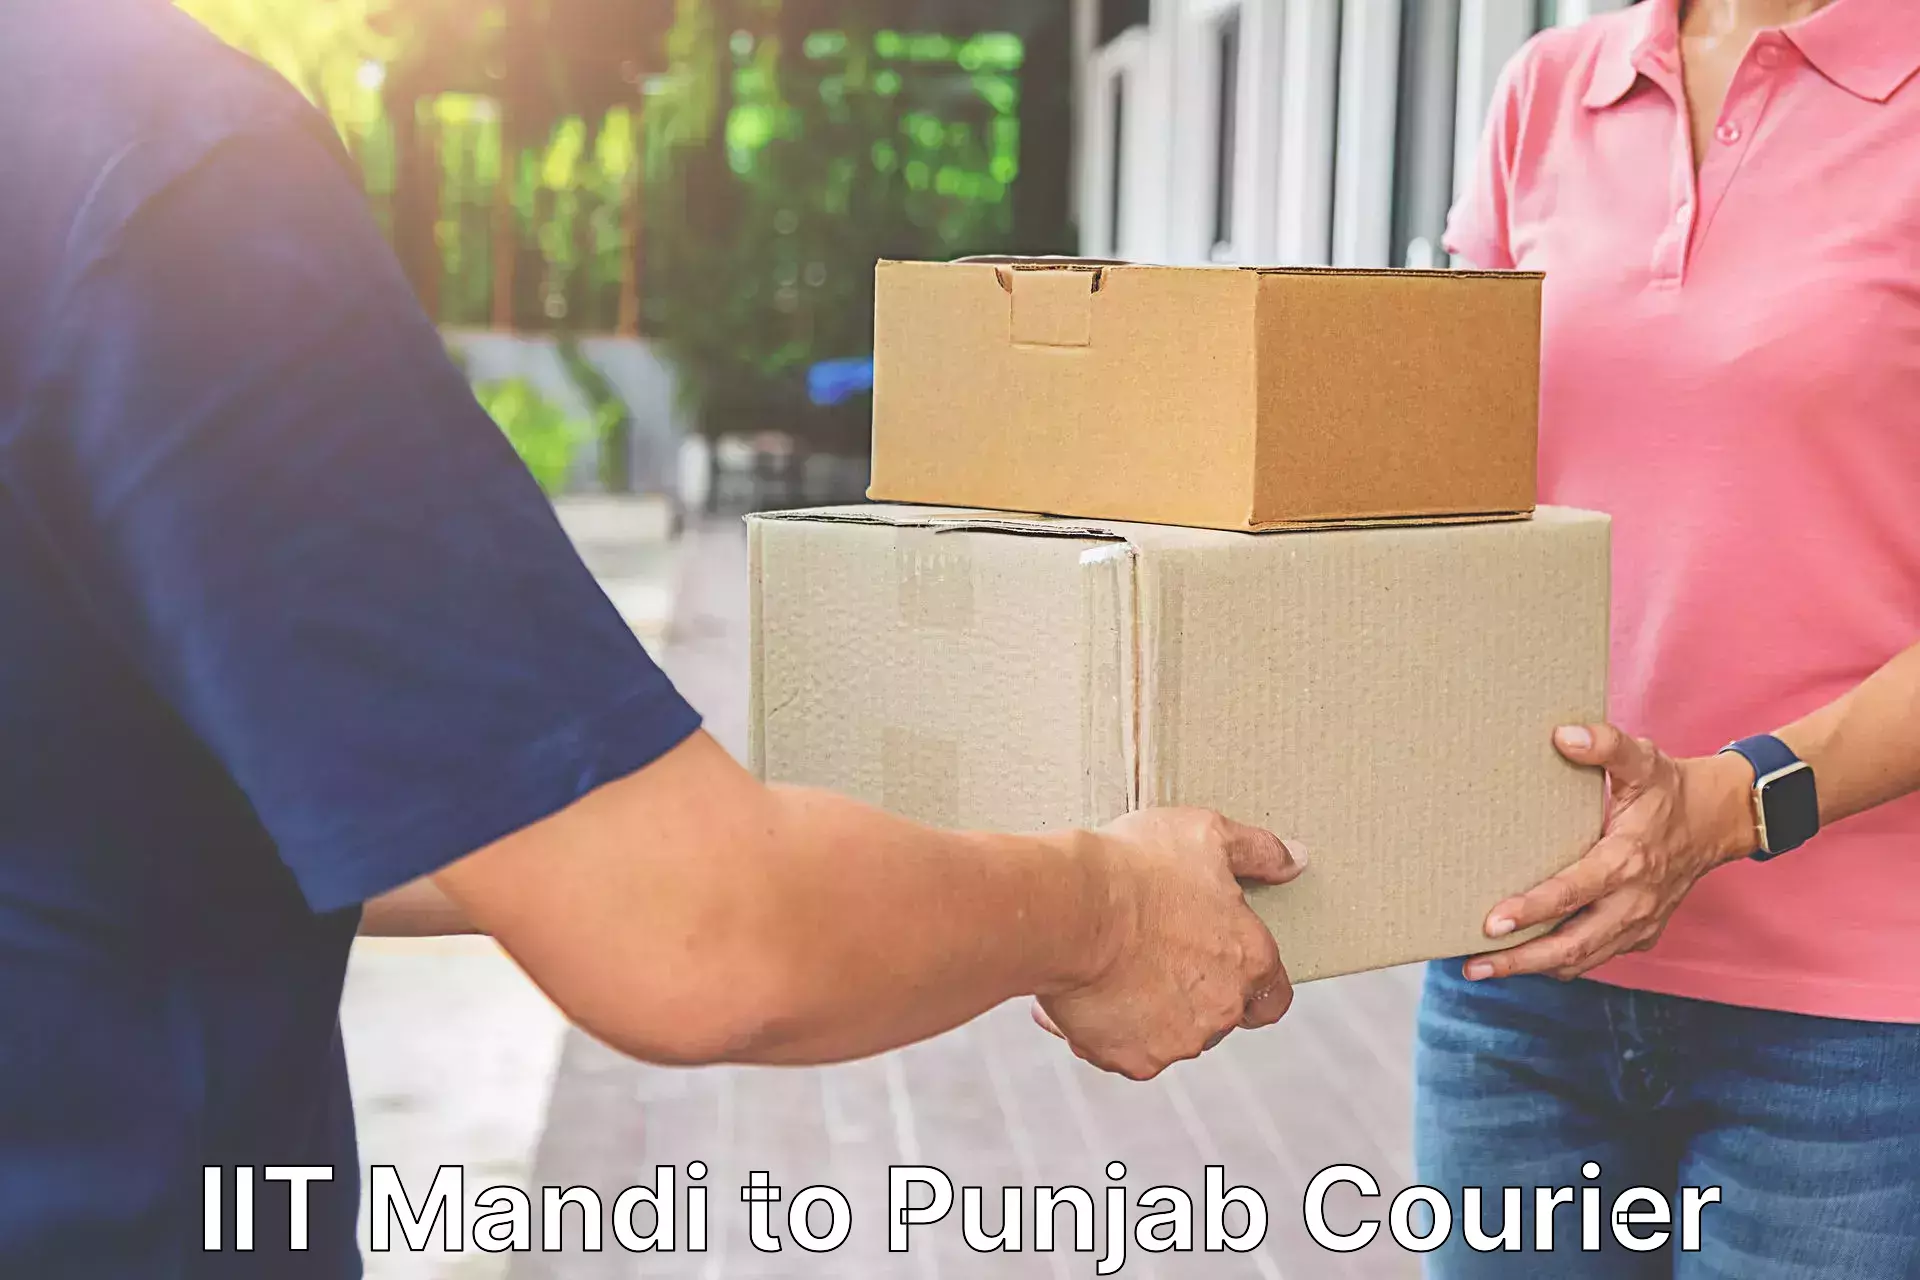 Courier service innovation IIT Mandi to Sultanpur Lodhi